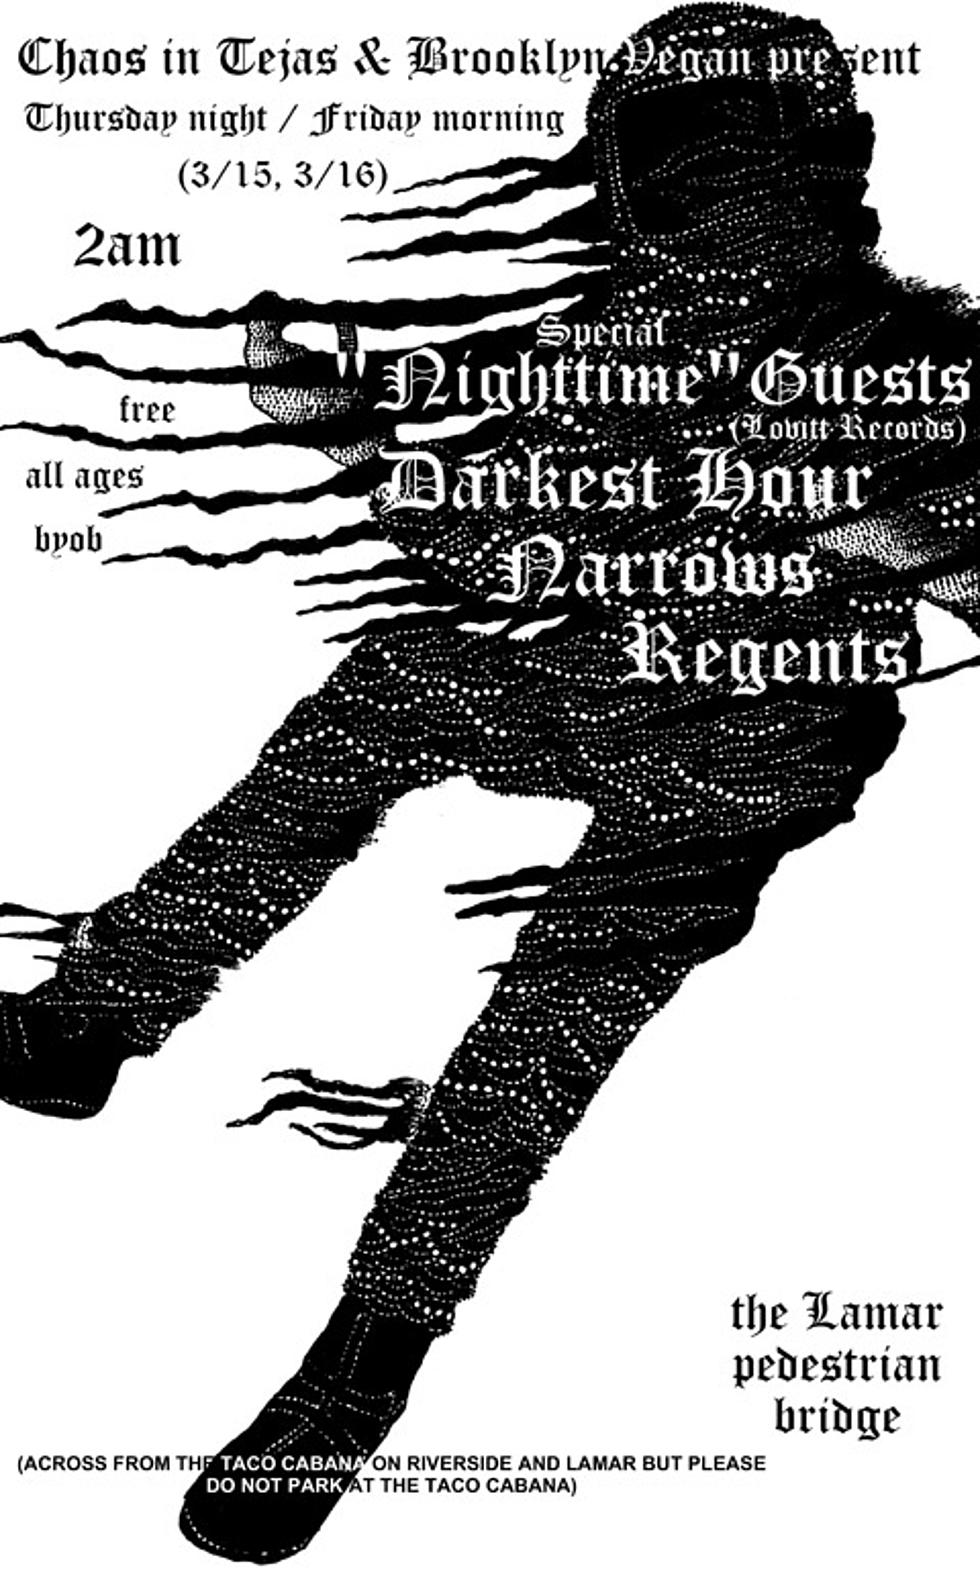 Announcing a BV-BBG/Chaos in Tejas bridge show with Darkest Hour, Narrows, Regents &#038; special &#8220;Nighttime&#8221; guests